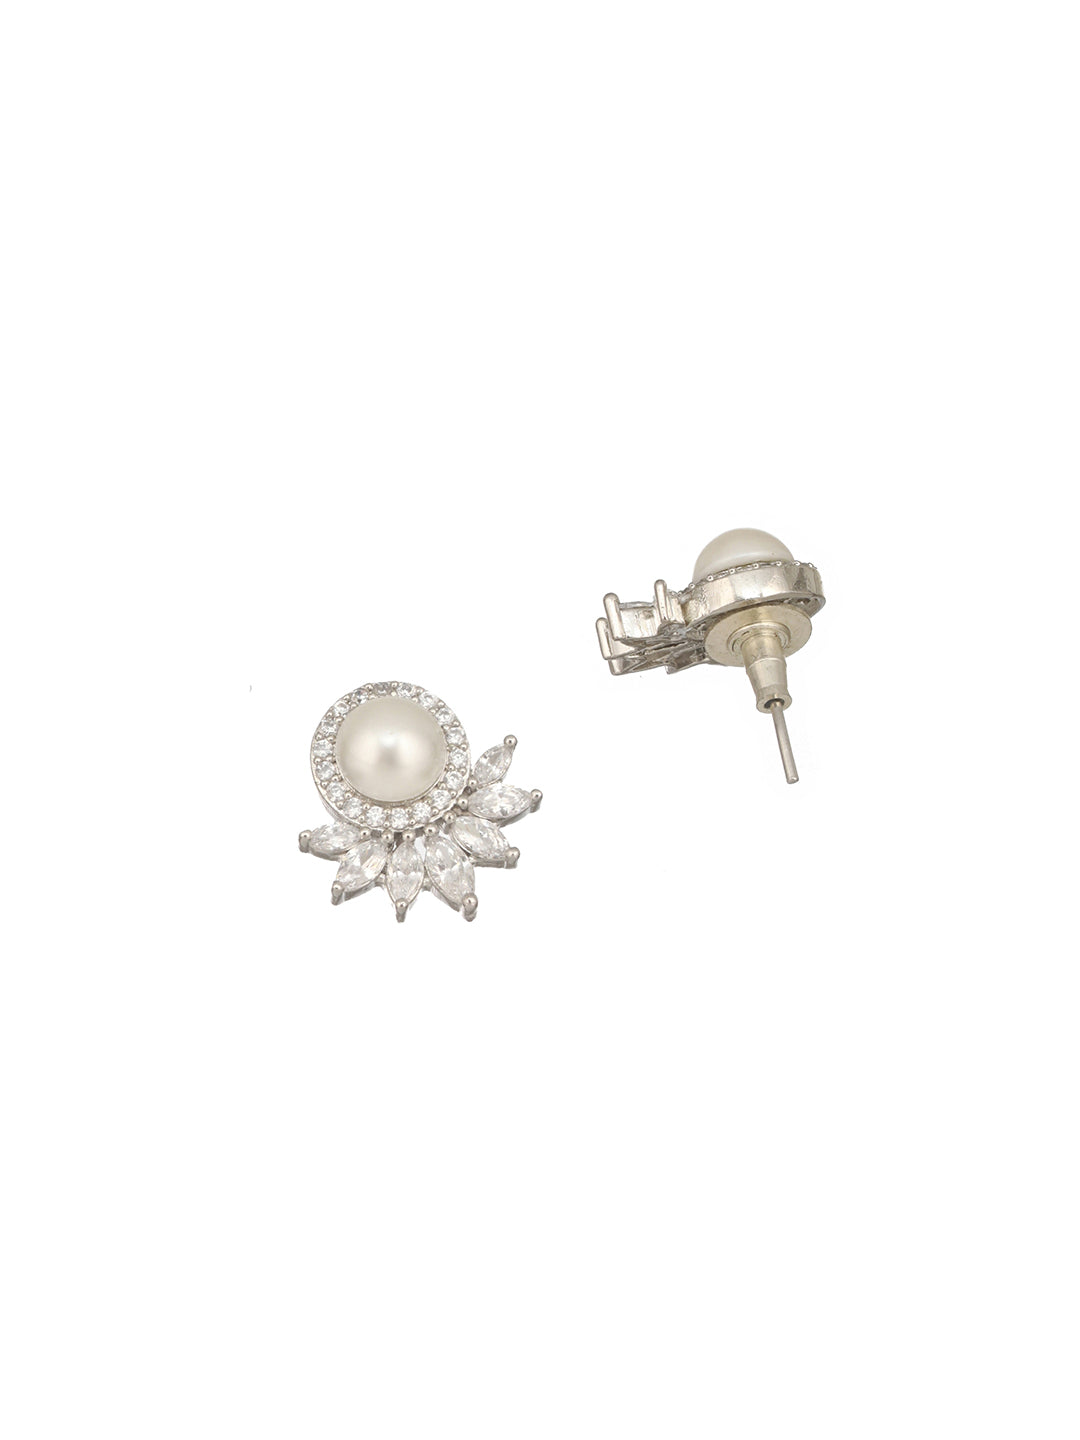 Jazz And Sizzle Silver Plated AD & Pearl Studded Studs Earrings - Jazzandsizzle